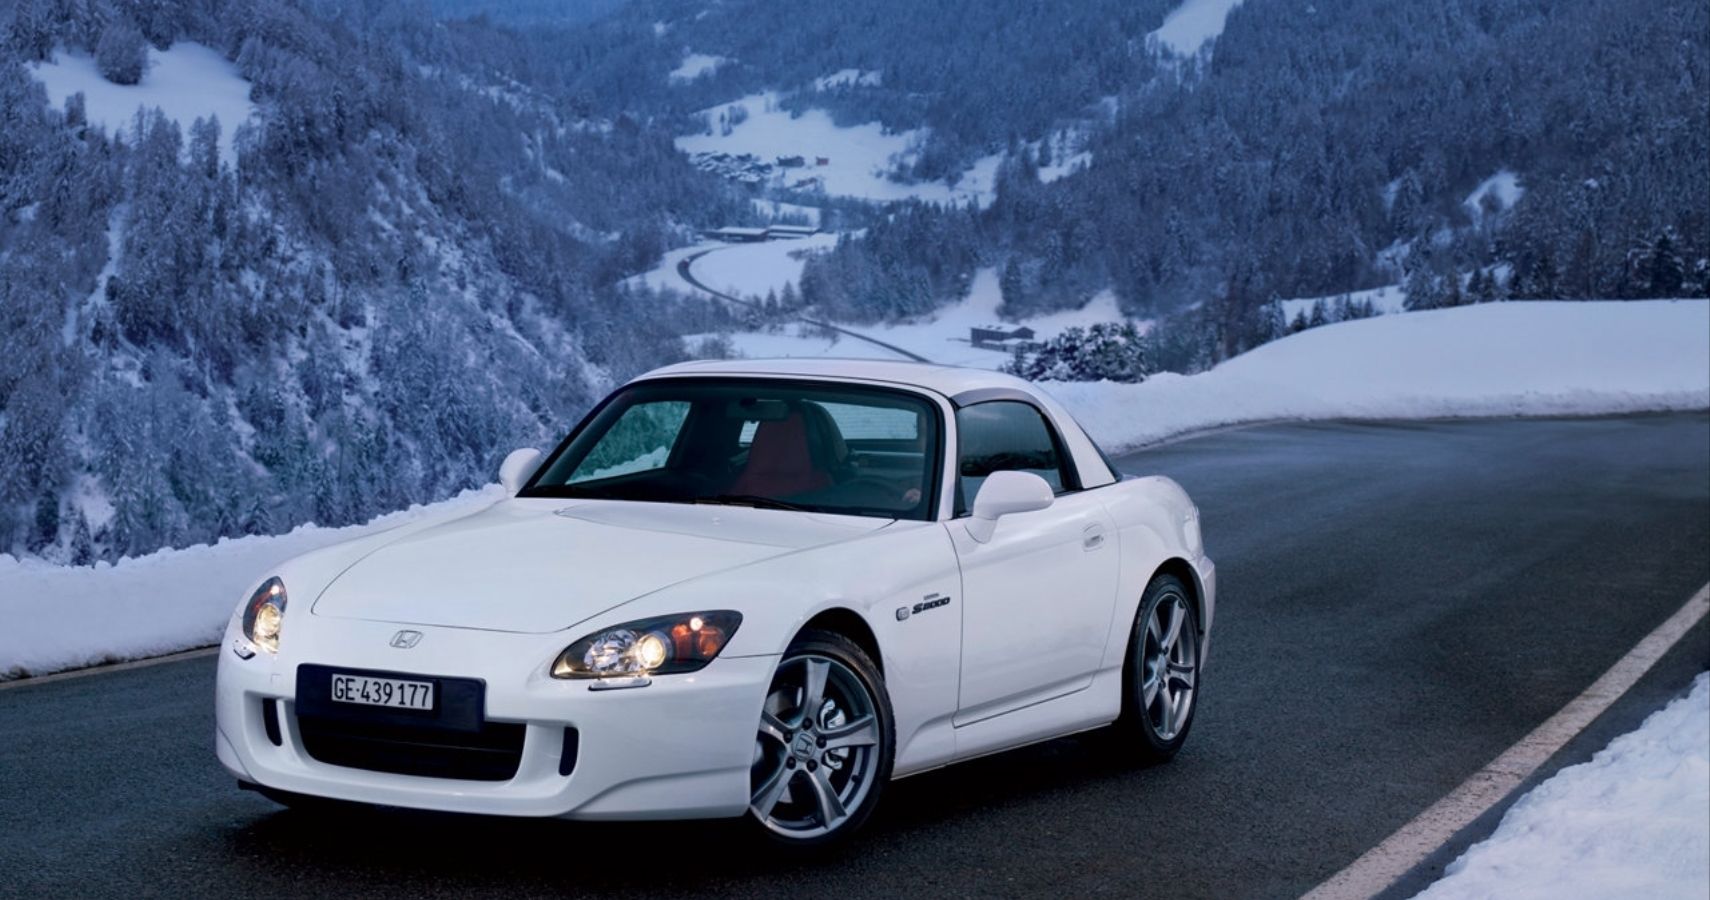 This Is What Made The Honda S2000 Superior To The Mazda Mx 5